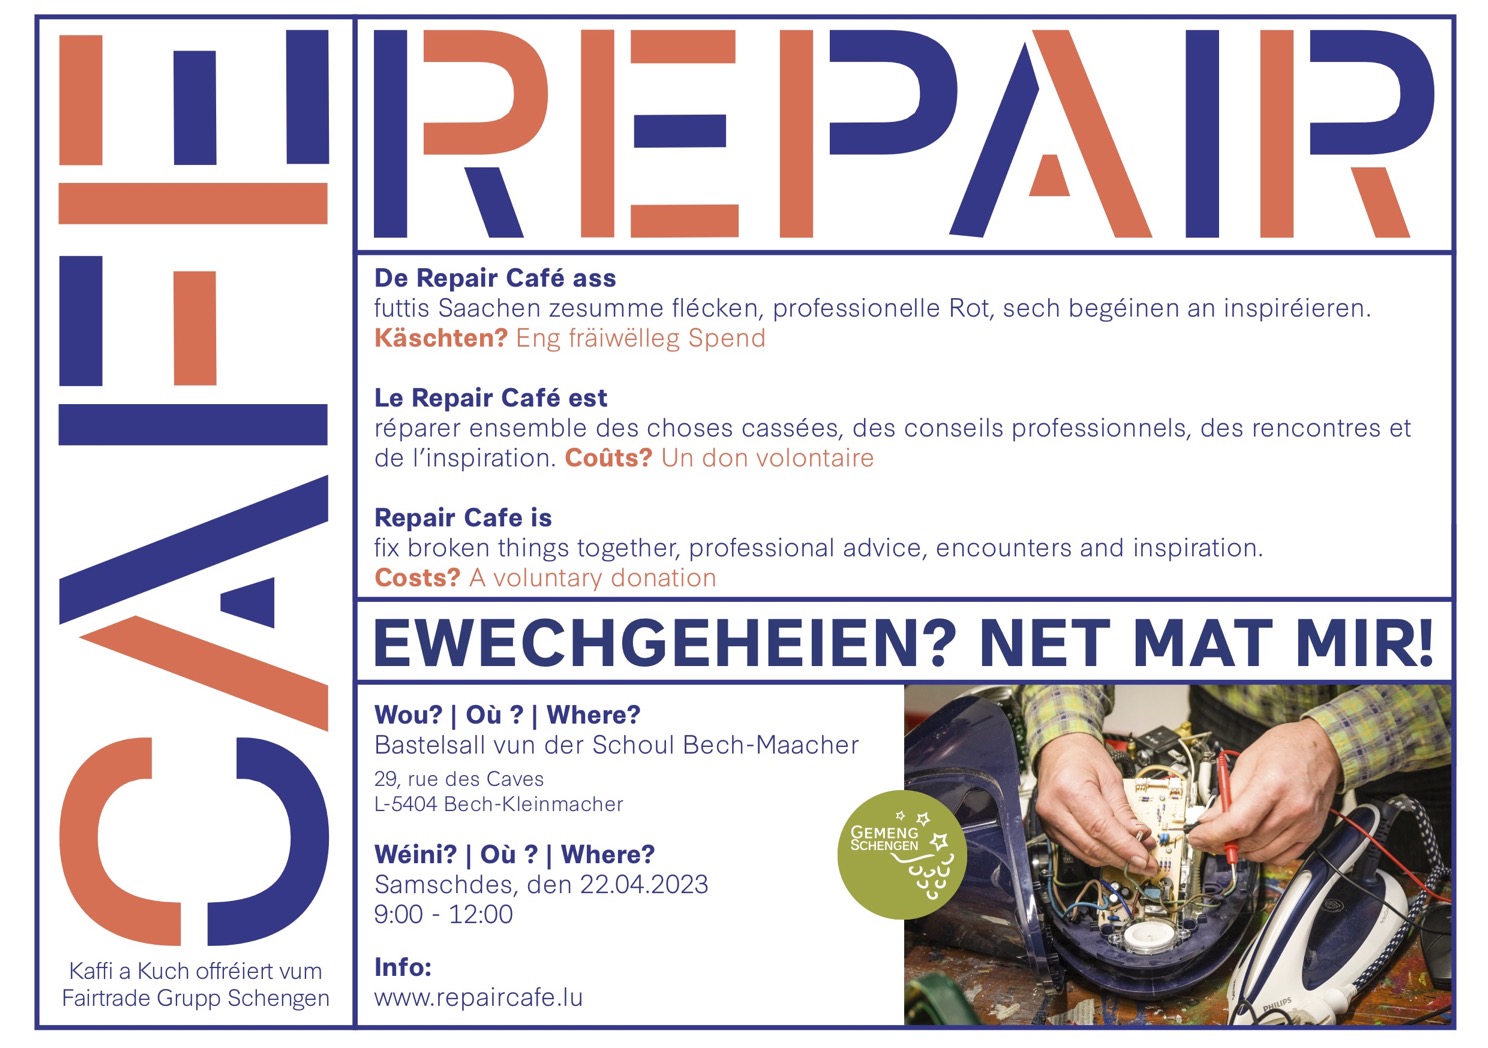 CELL (Centre for Ecological Learning Luxembourg), Repair Cafe Lëtzebuerg